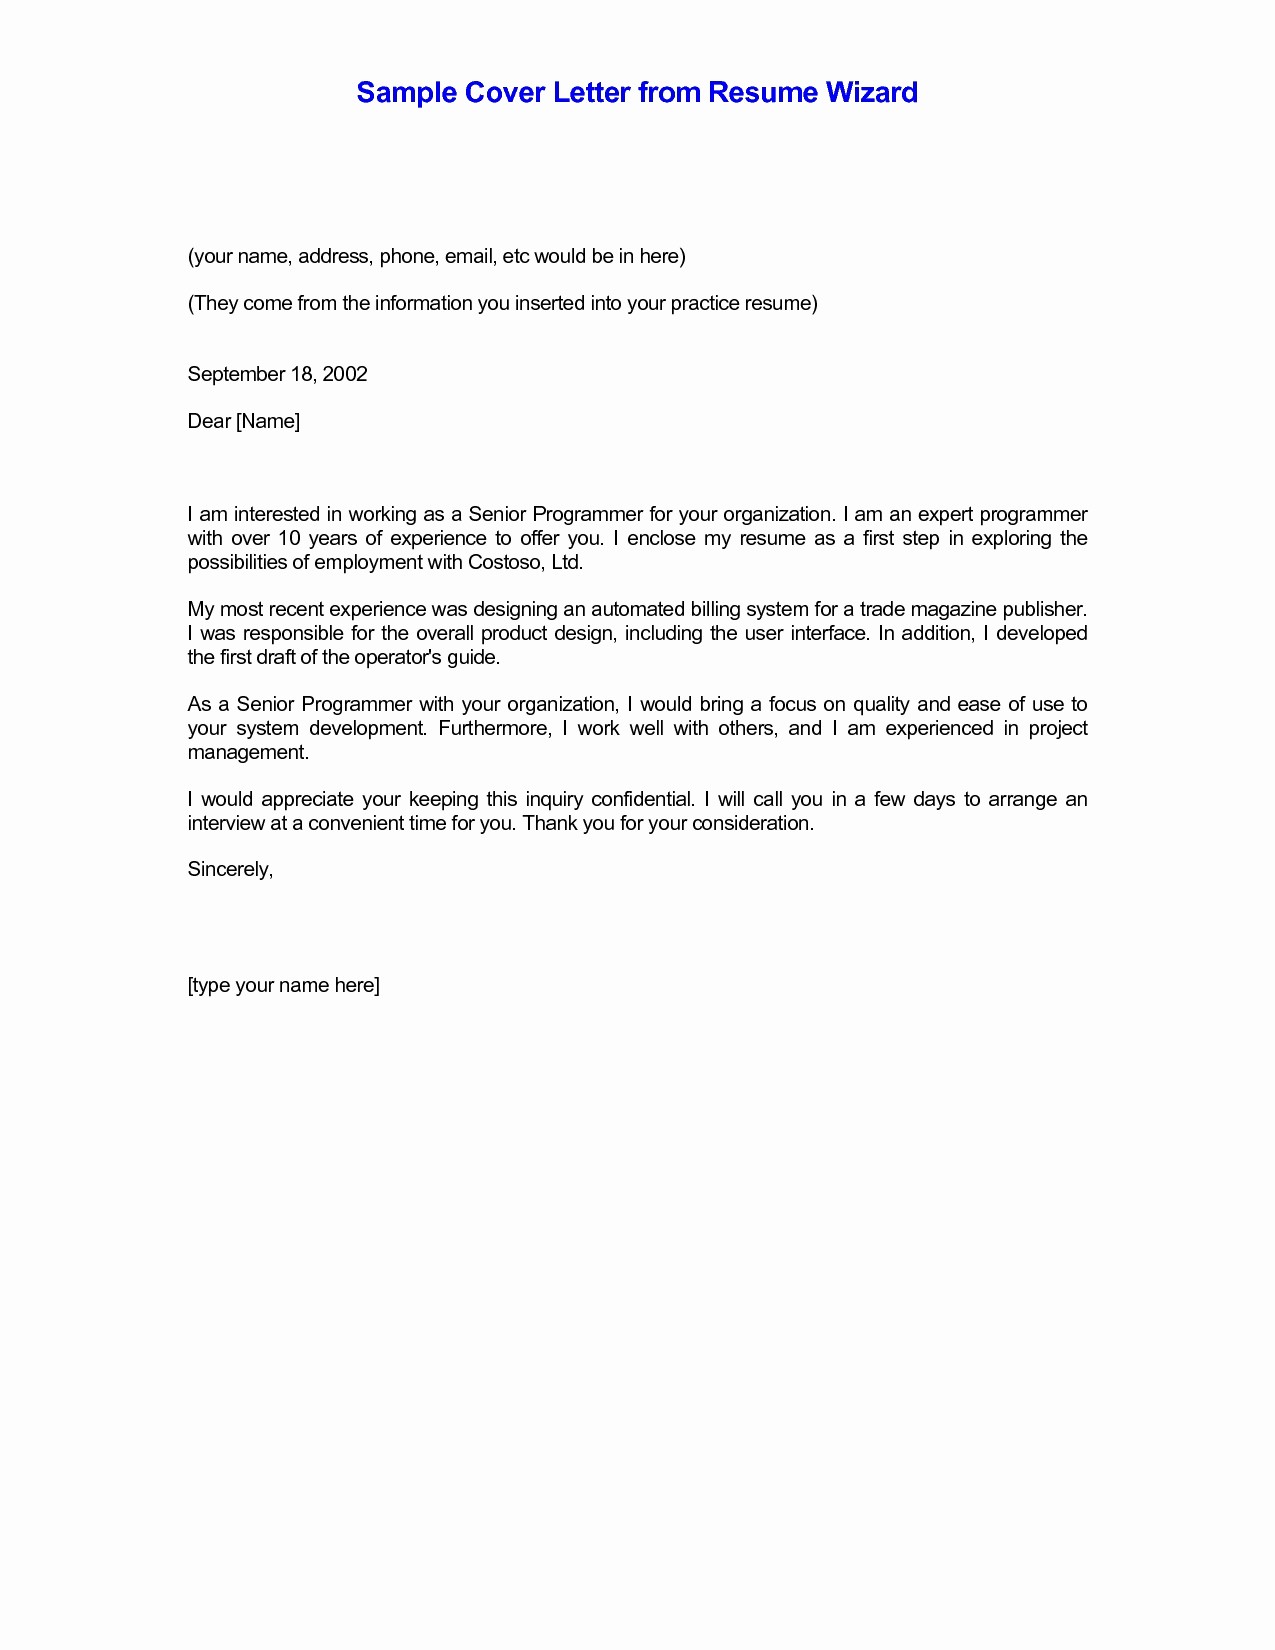 Cover Letter Templates for Resumes Best Of Email Resume Cover Letter Template